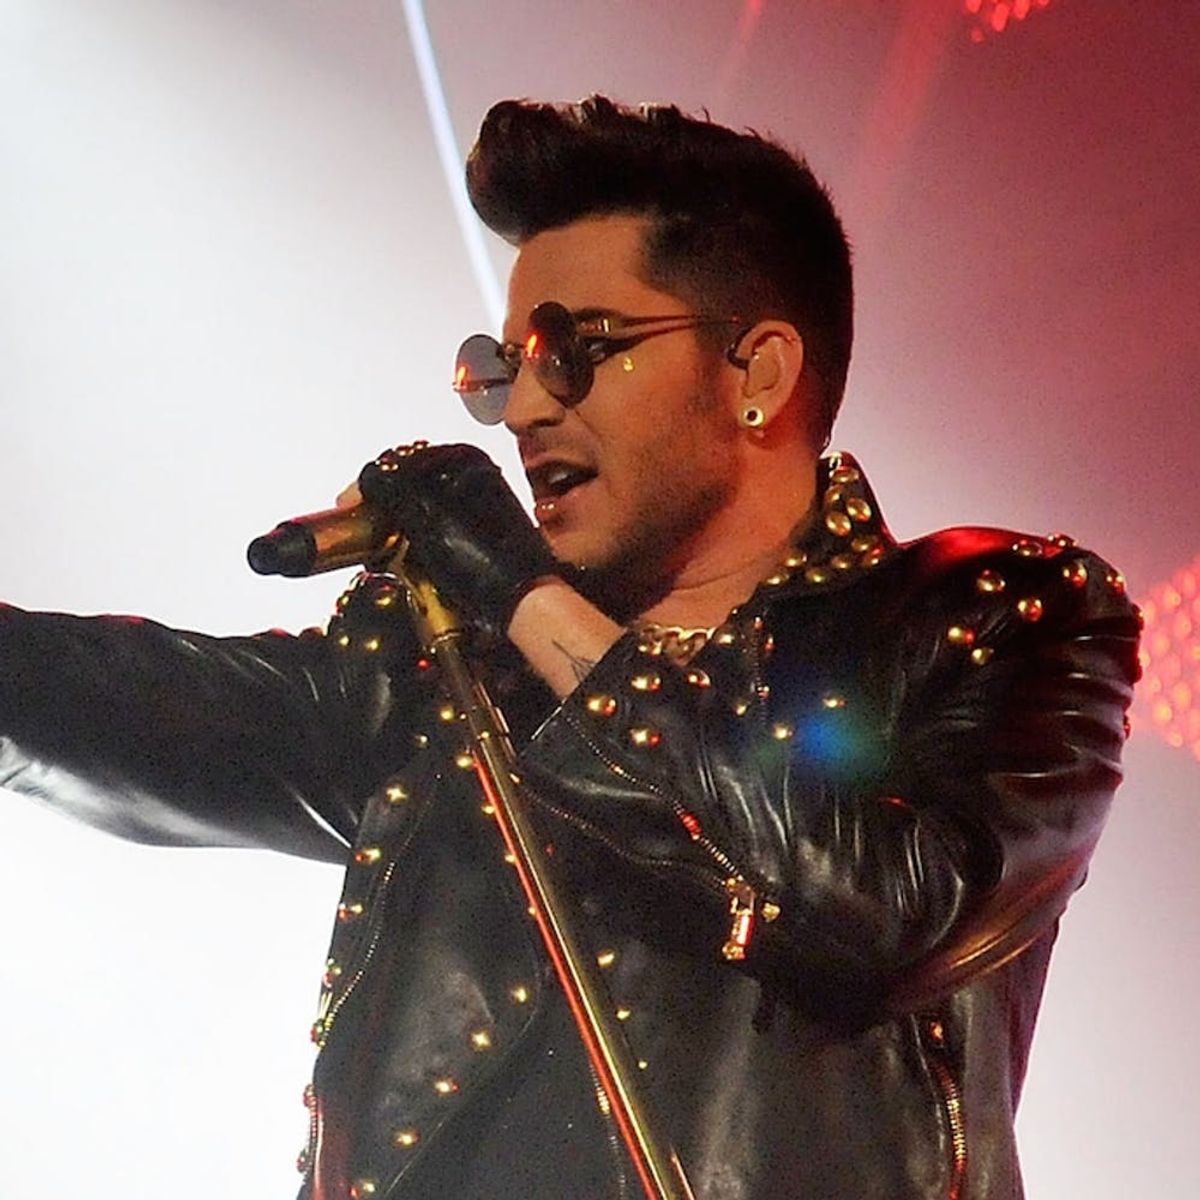 Adam Lambert in the Rocky Horror Remake Is the Most Perfect Thing Ever